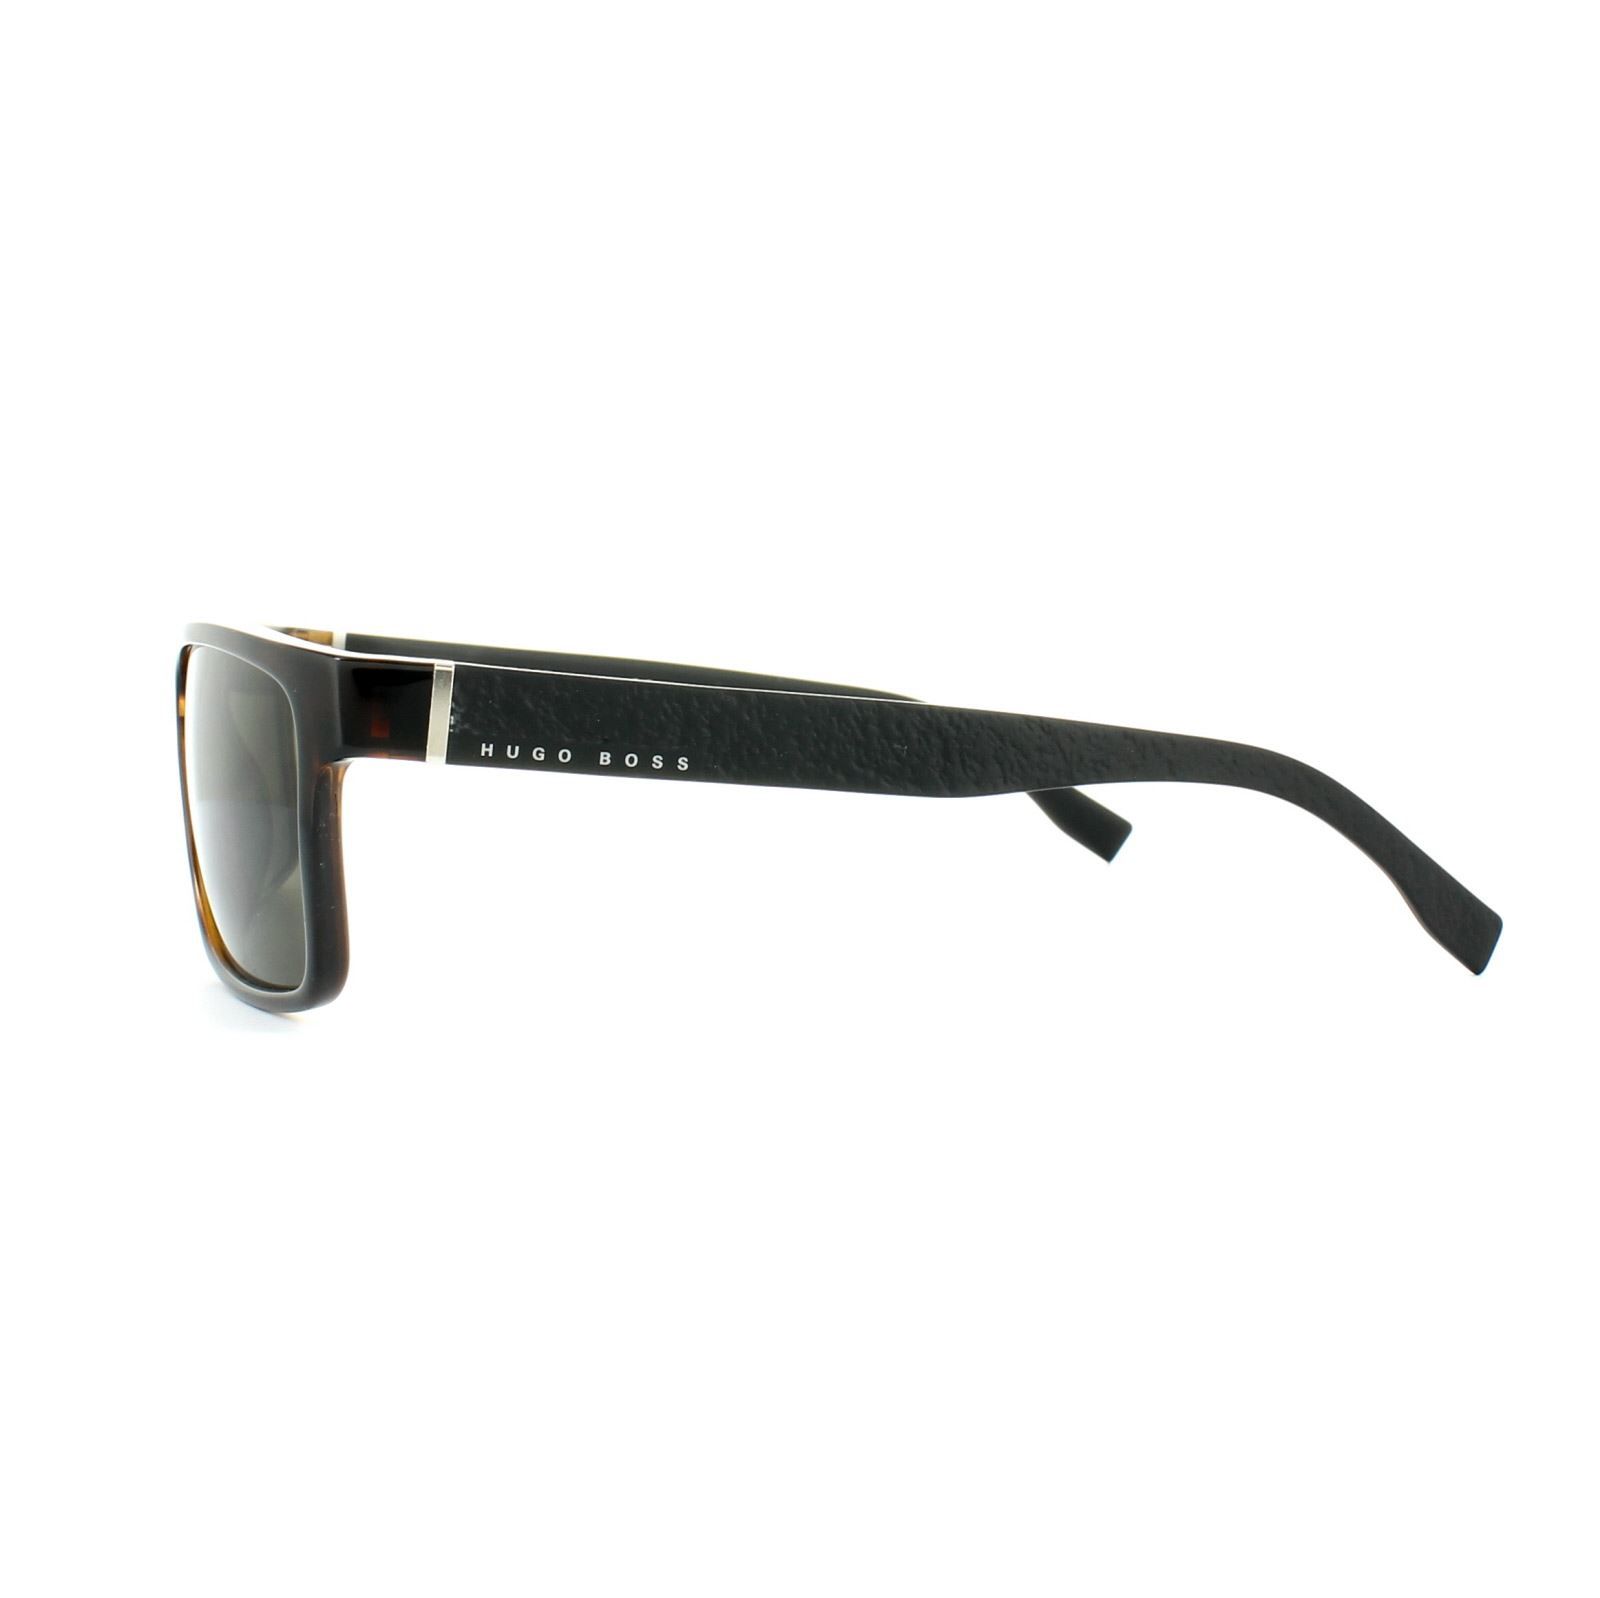 Hugo Boss Sunglasses 0919 Z2I NR Havana Black Grey are a classic rectangular style with squared off shape and typical contemporary finish from Hugo Boss. Matt finish with slightly textured finish to the temples complete the modern urban design.